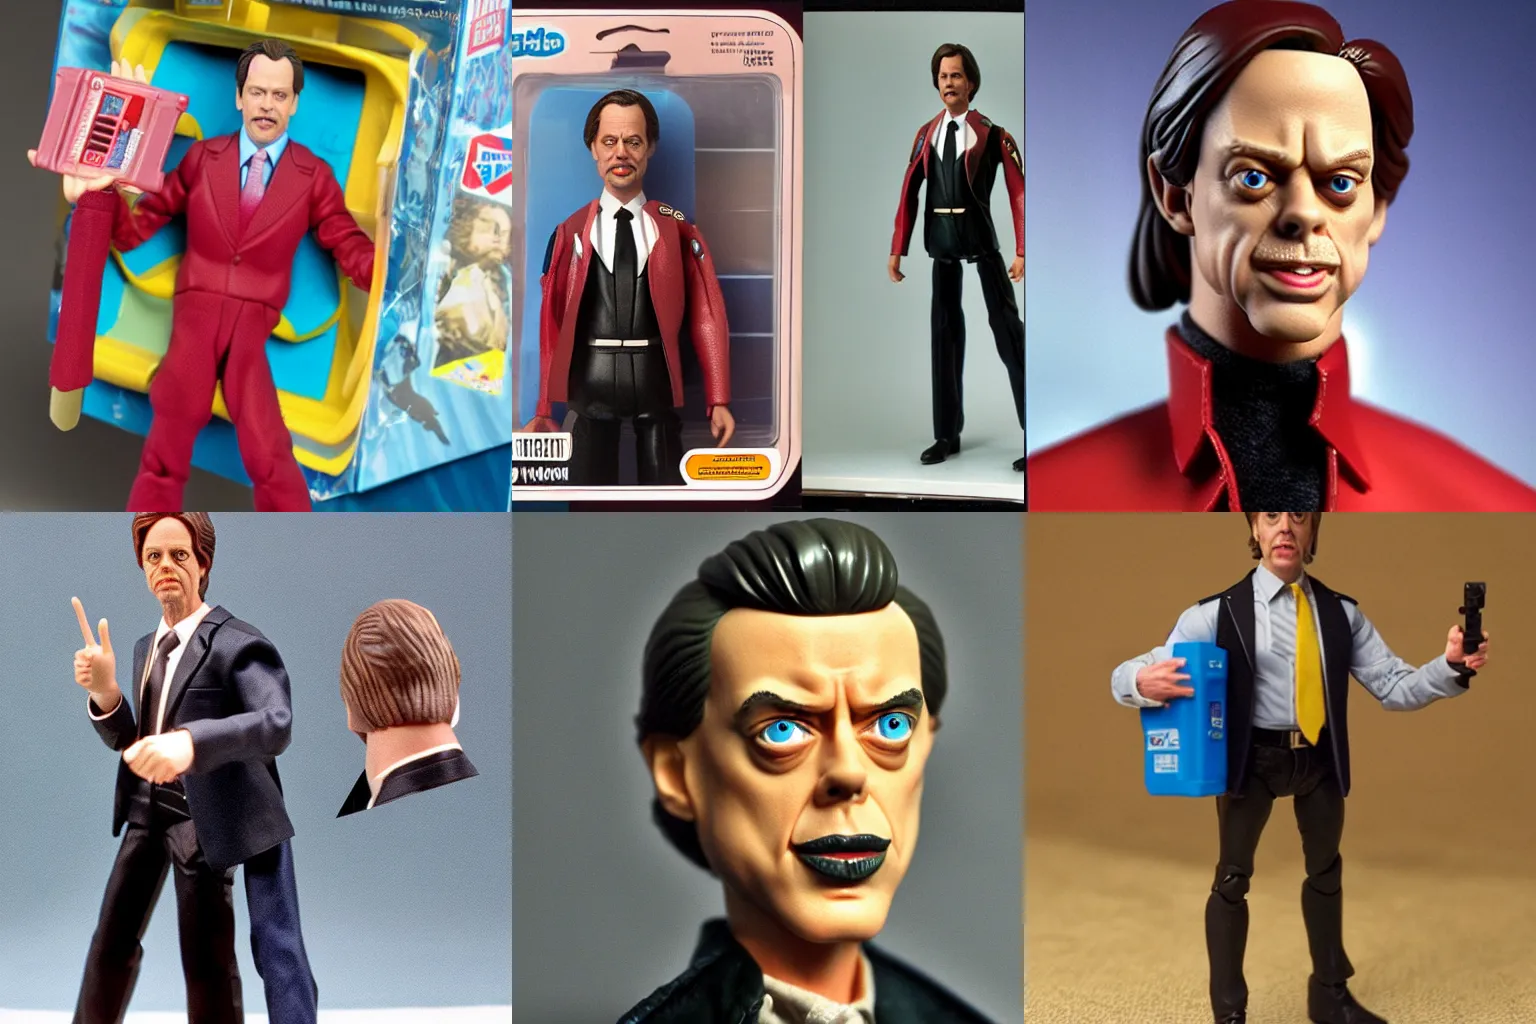 Prompt: Steve Buscemi as a 1980s style Hasbro action figure with 5 points of articulation